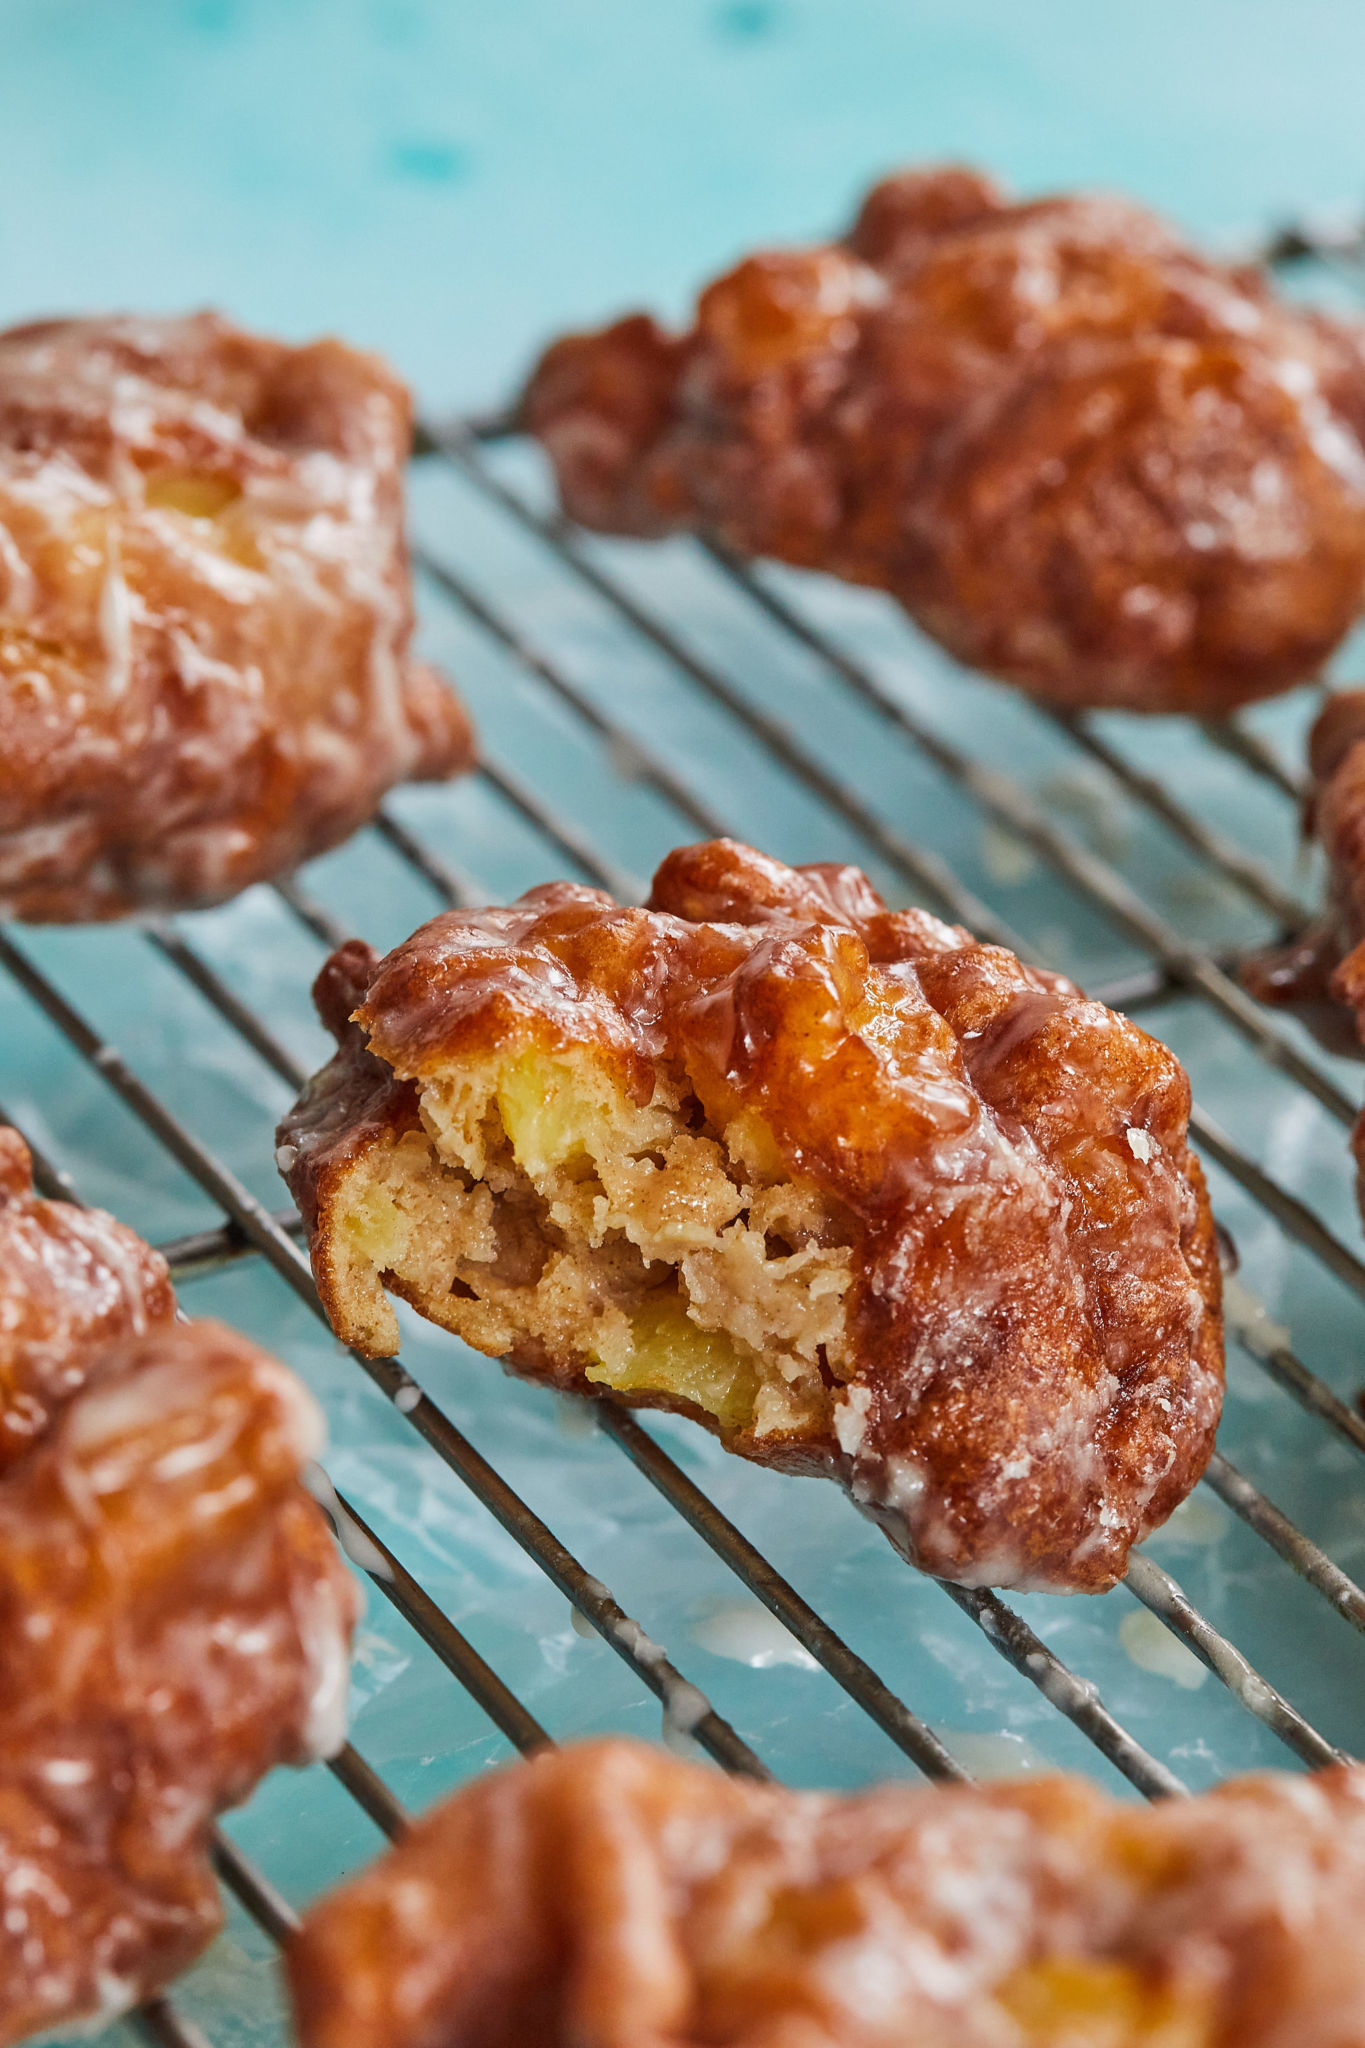 The interior of an apple fritter to show texture and consistency.